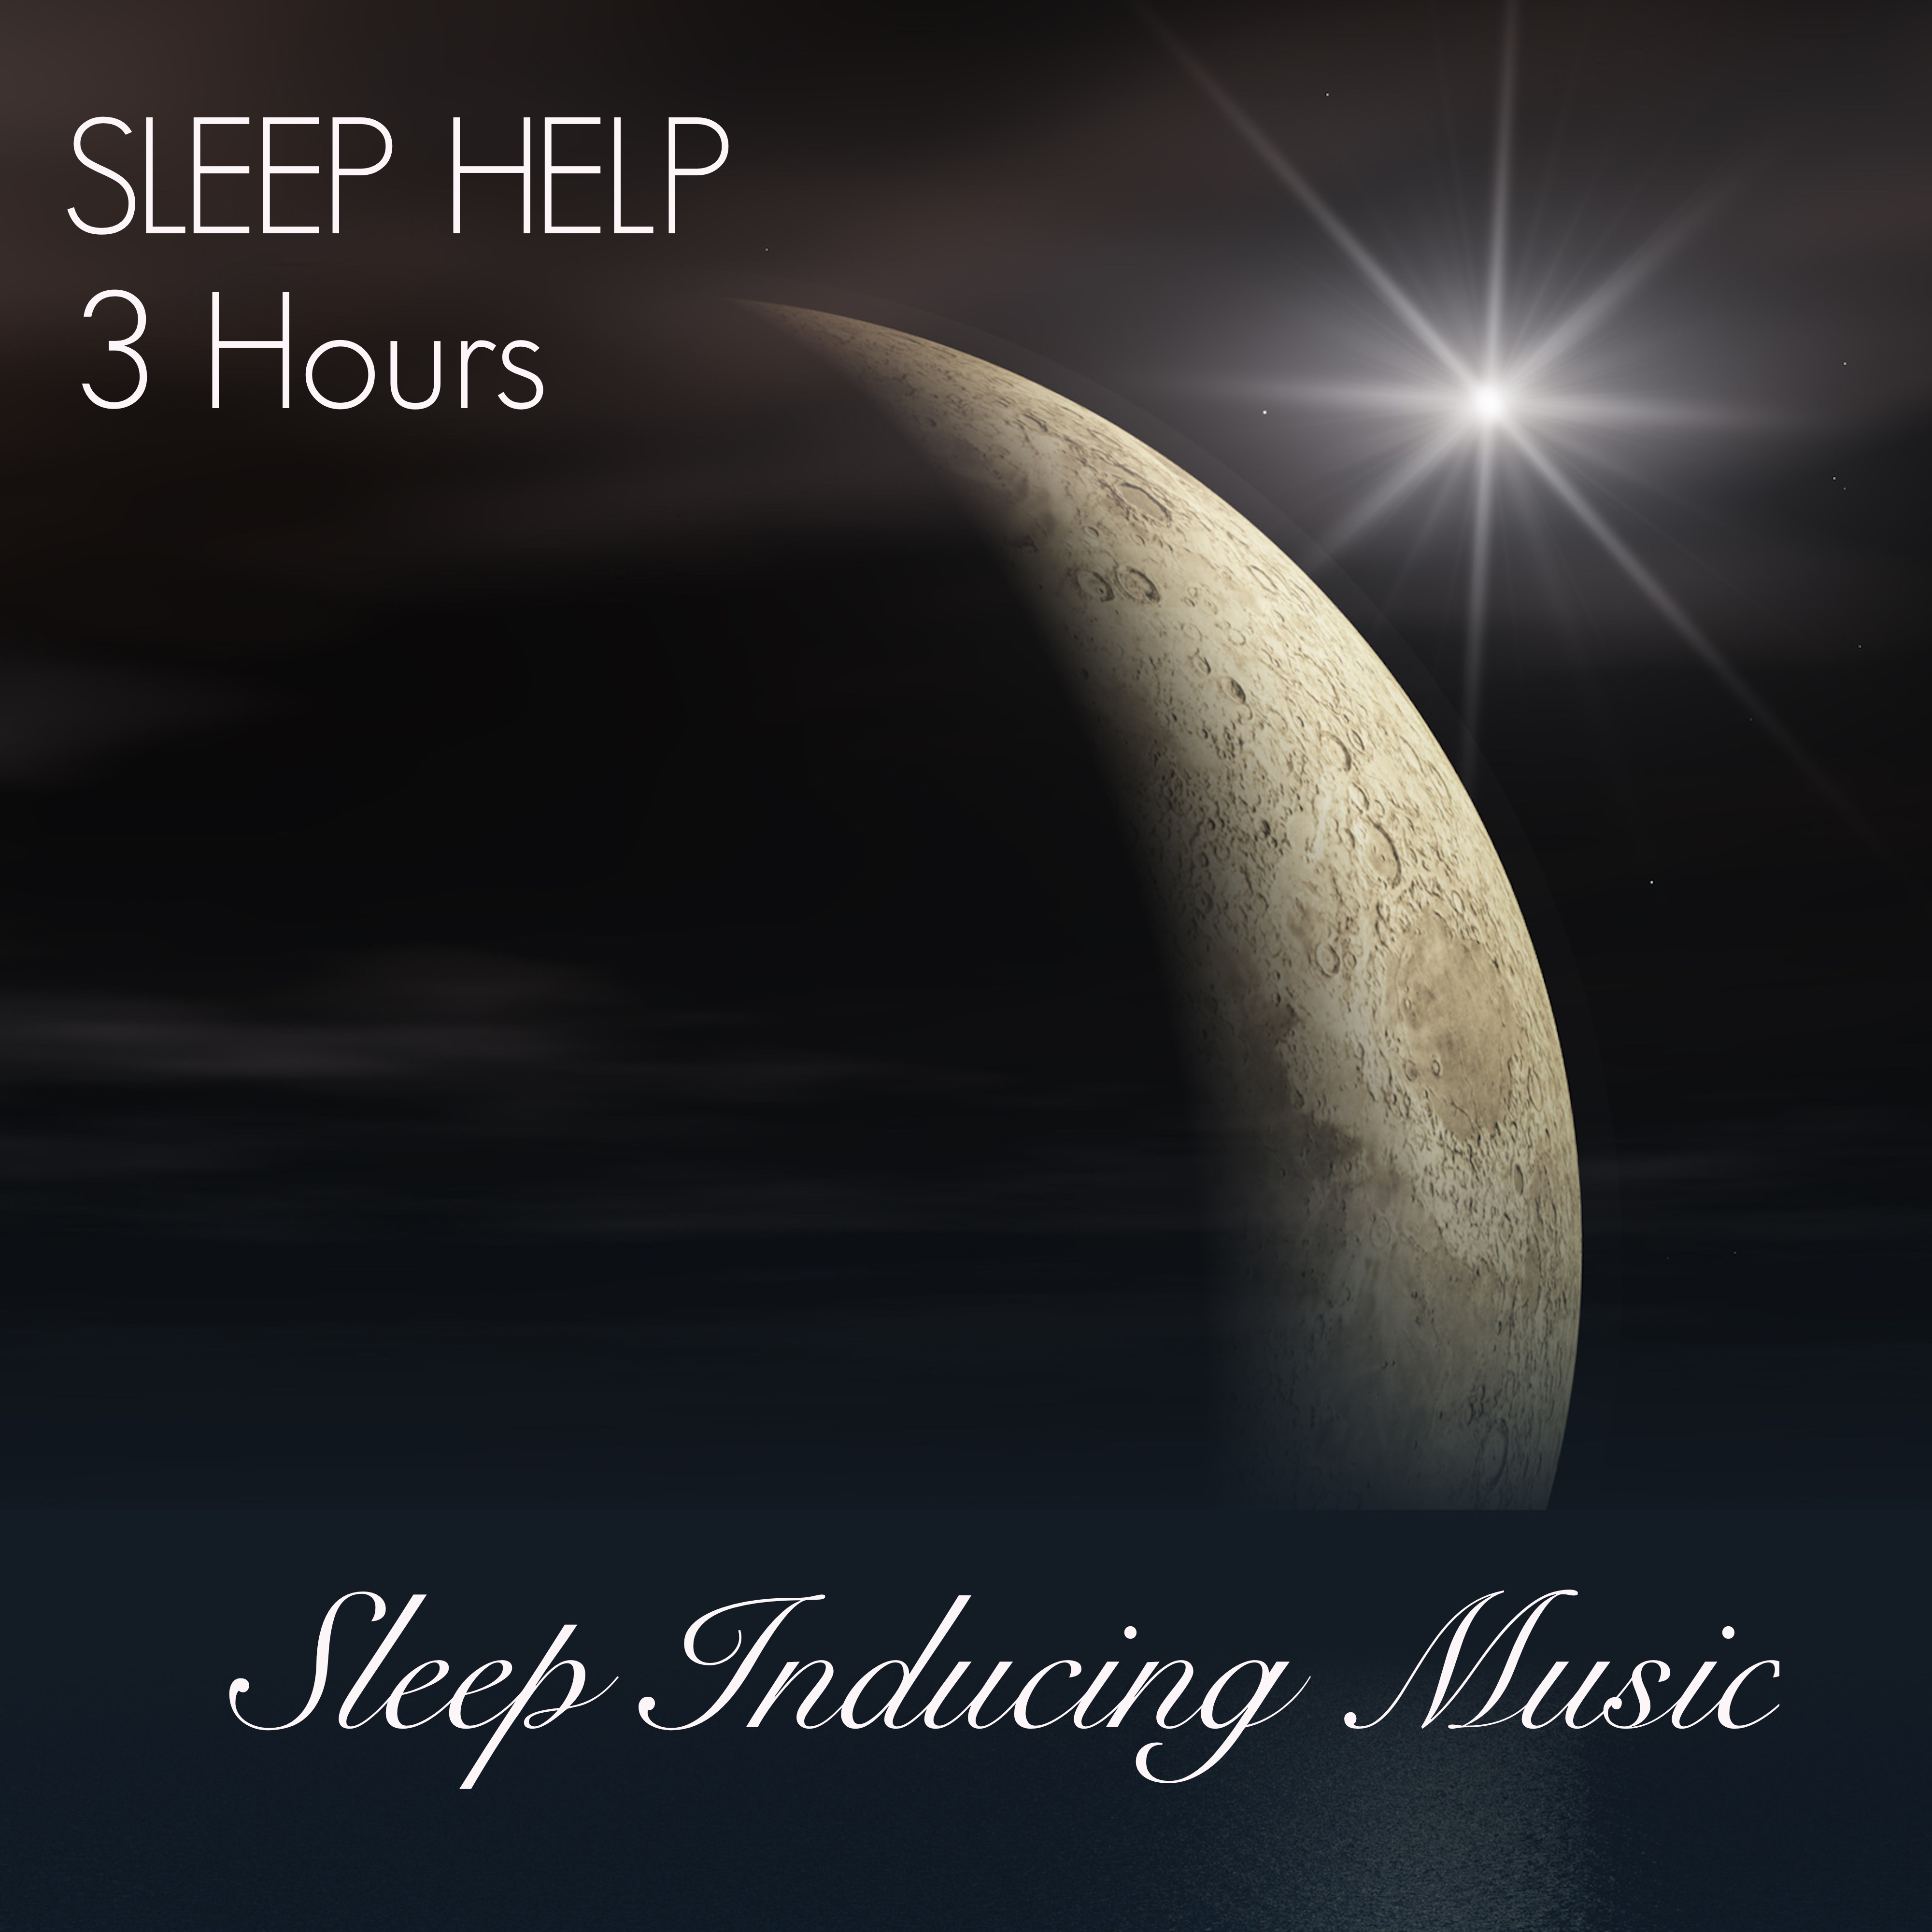 Sleep Help - 3 Hours Sleep Inducing Music & Sleeping Songs with White Noise and Relaxing Nature Sounds to Help you Sleep at Night